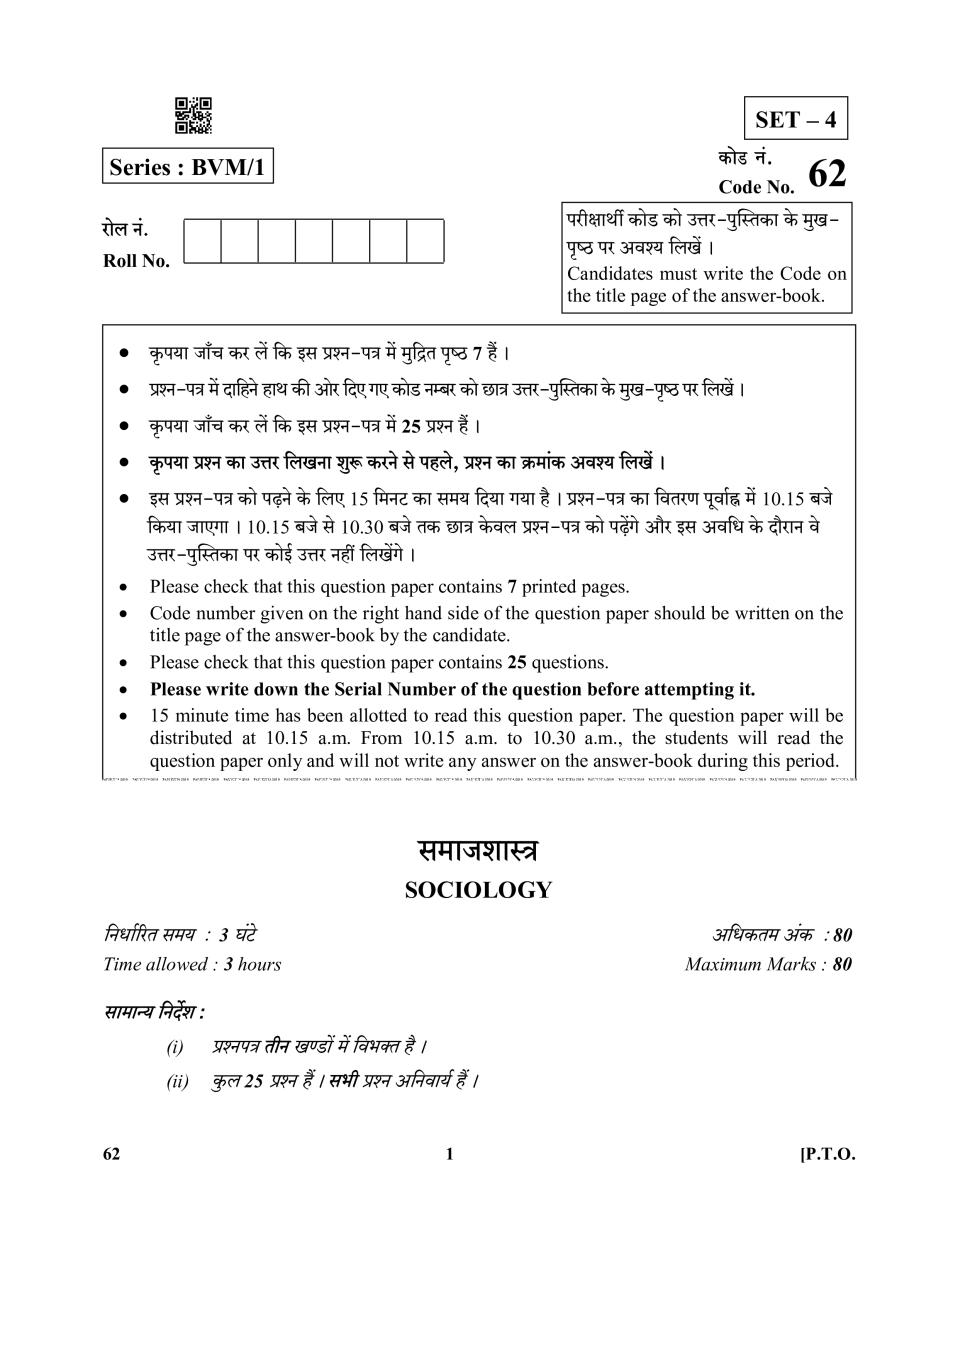 CBSE Class 12 Sociology Question Paper 2019 Set 2 - Page 1